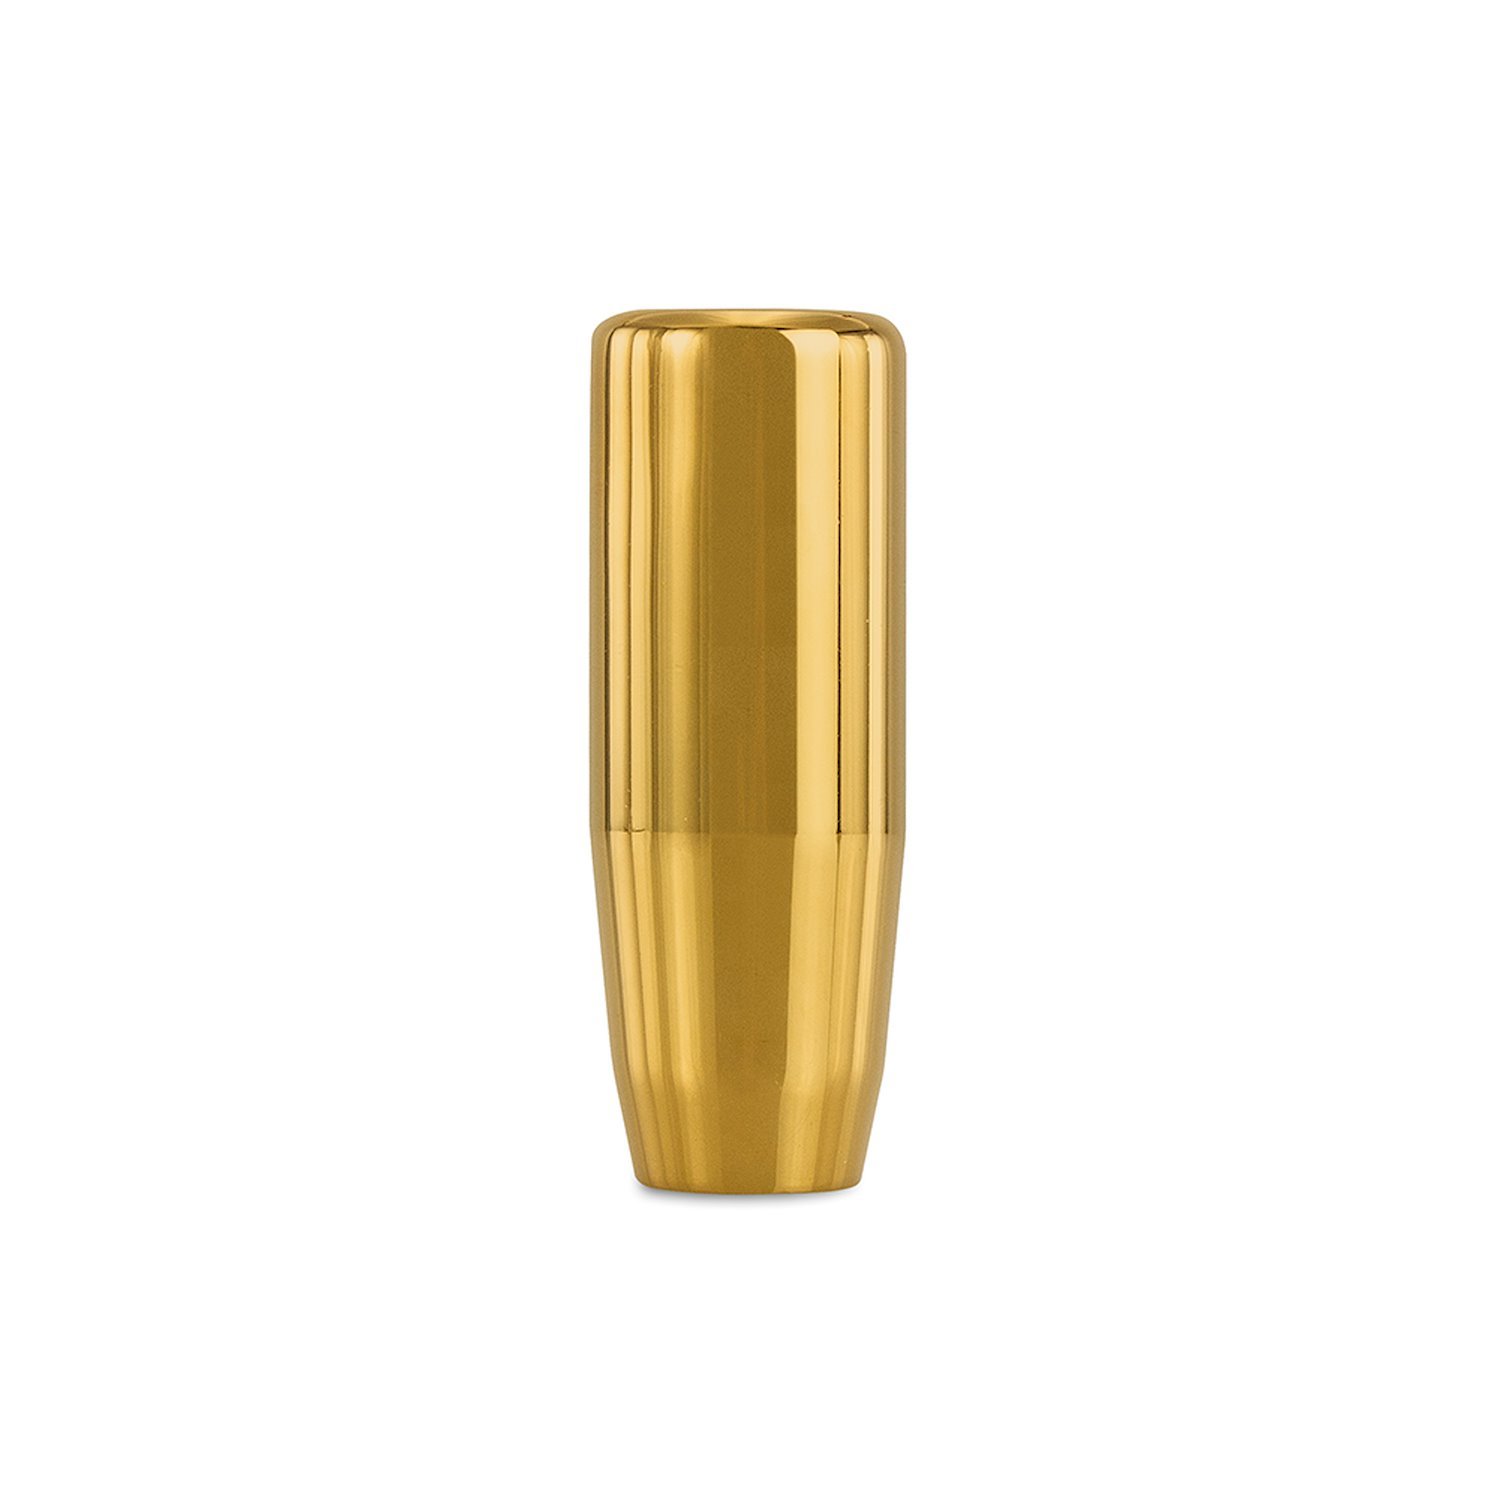 WEIGHTED SHIFT KNOB GOLD